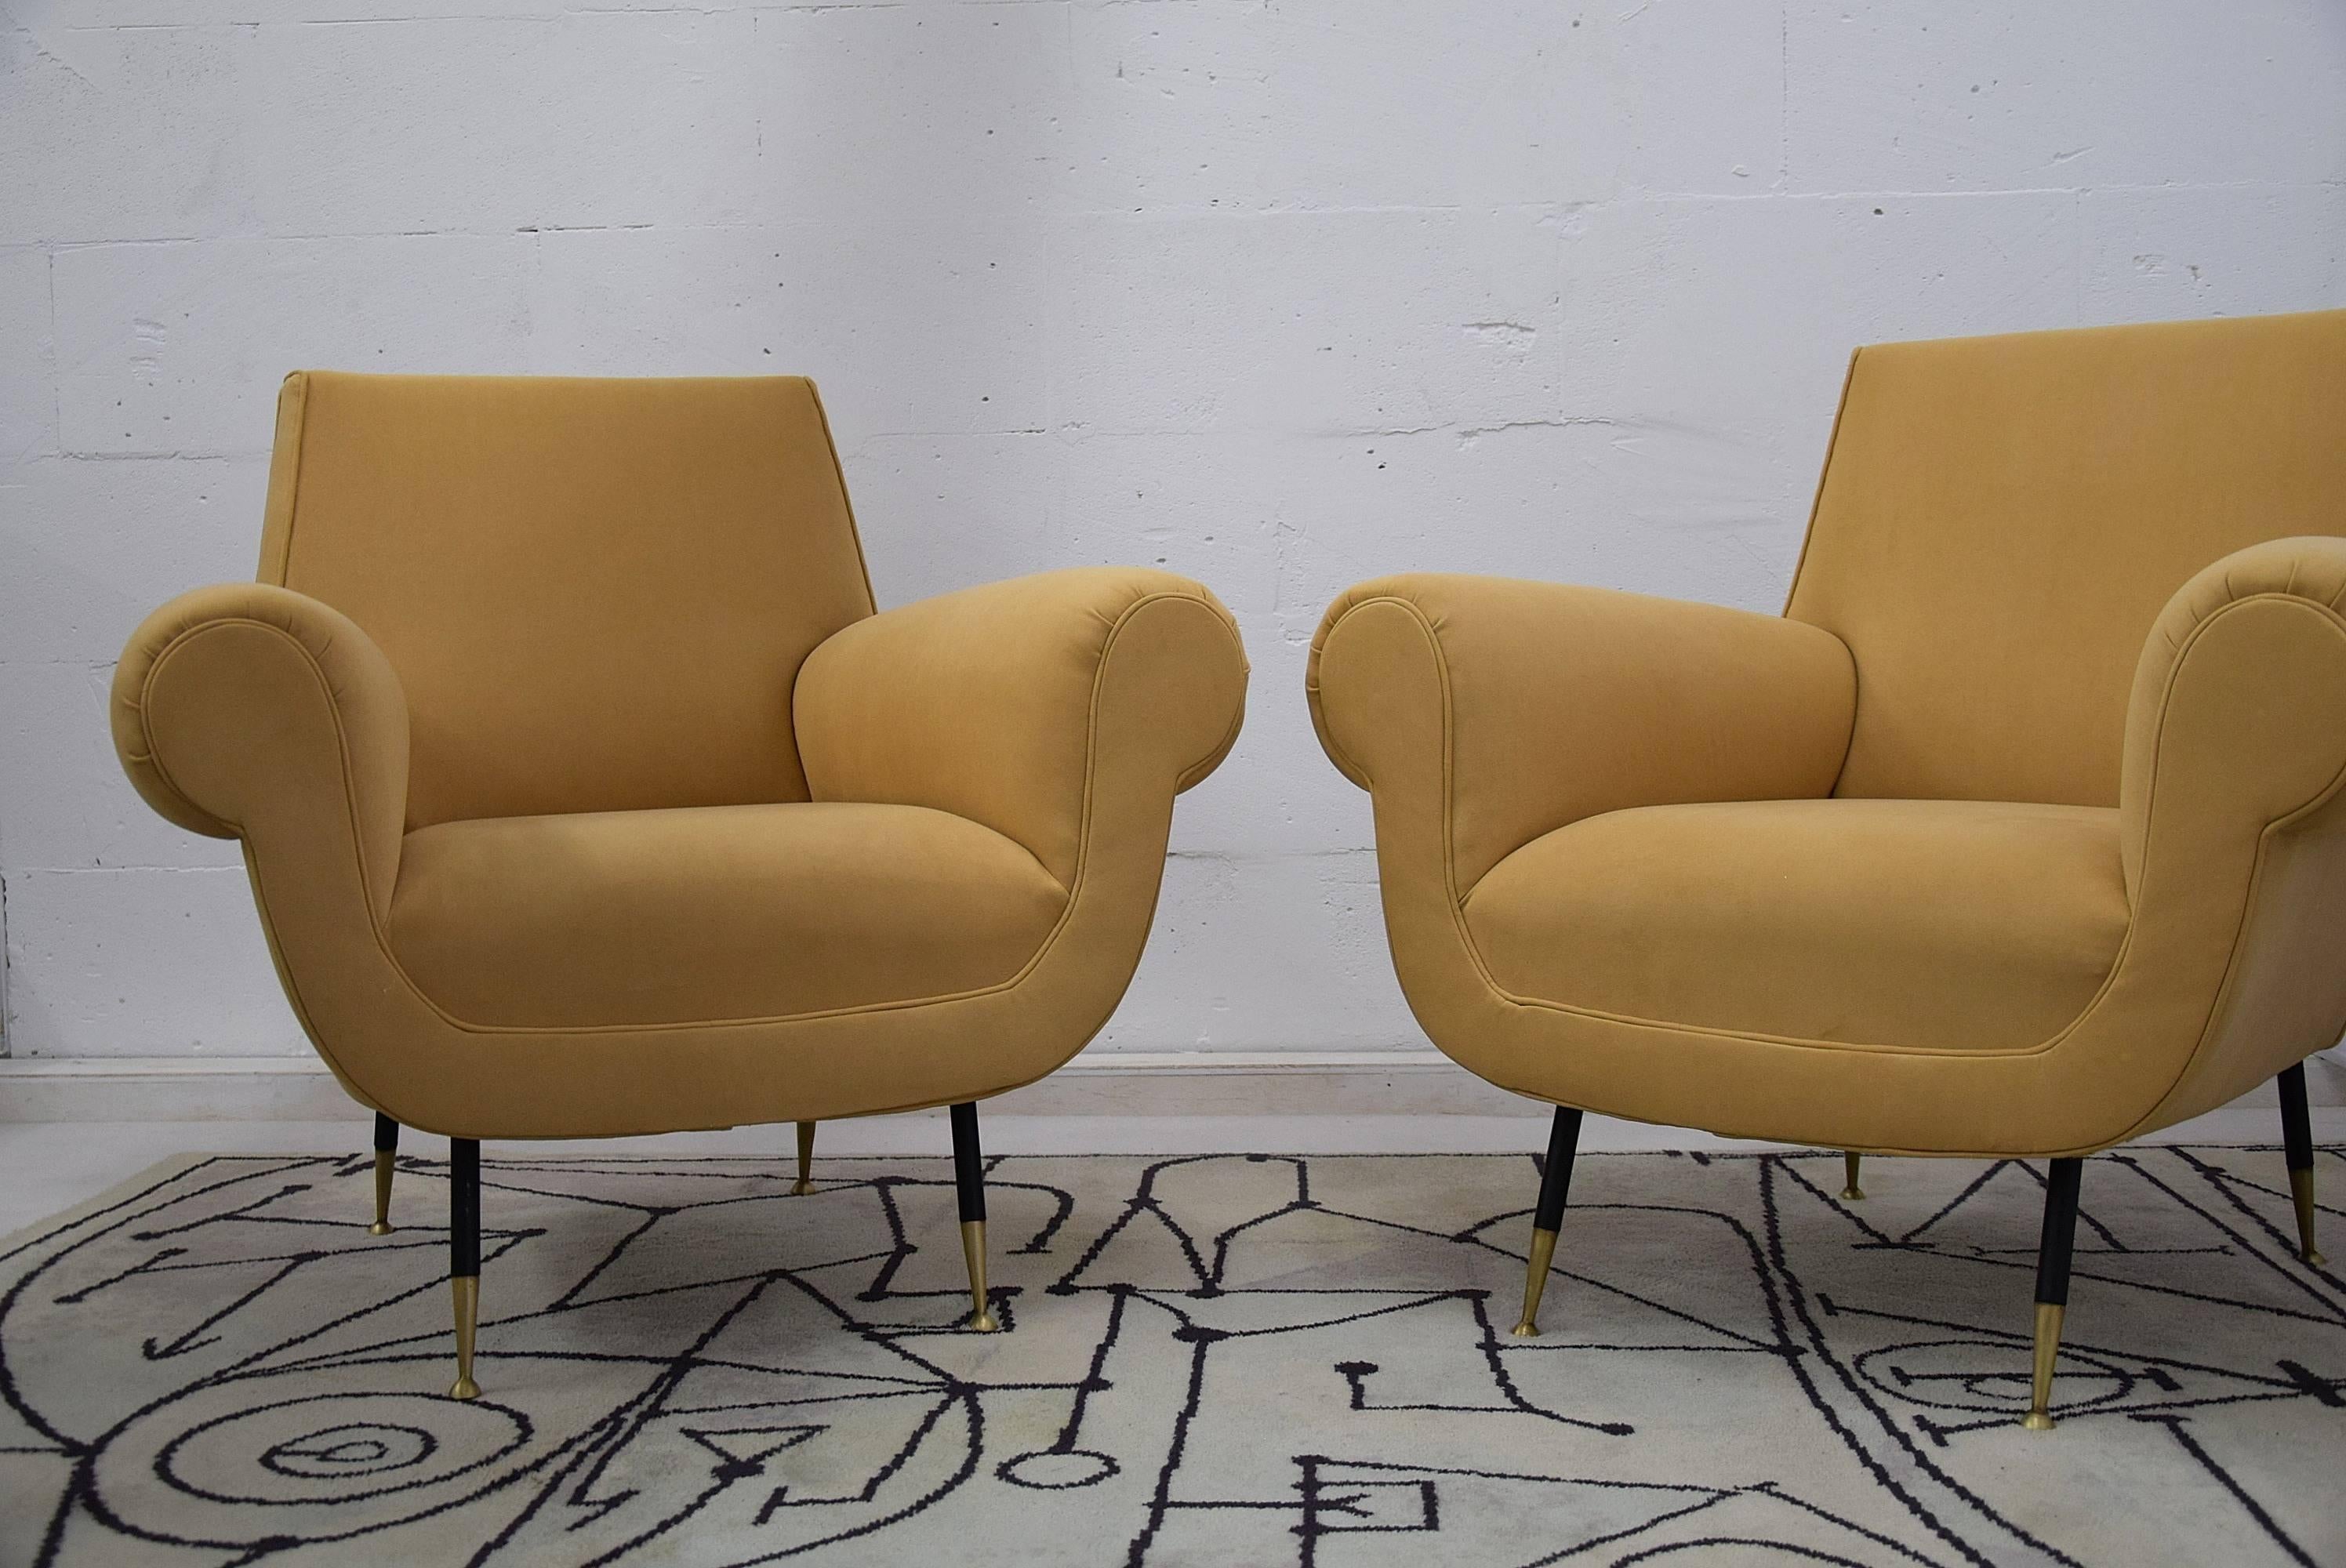 Mid century modern Minotti beige lounge chairs
Elegant and very stylish Mid-Century lounge chairs designed by Gigi Radice. 

The chairs have been fully restored and meticulously upholstered in Tuscany with all new foam and camel colored alcantara